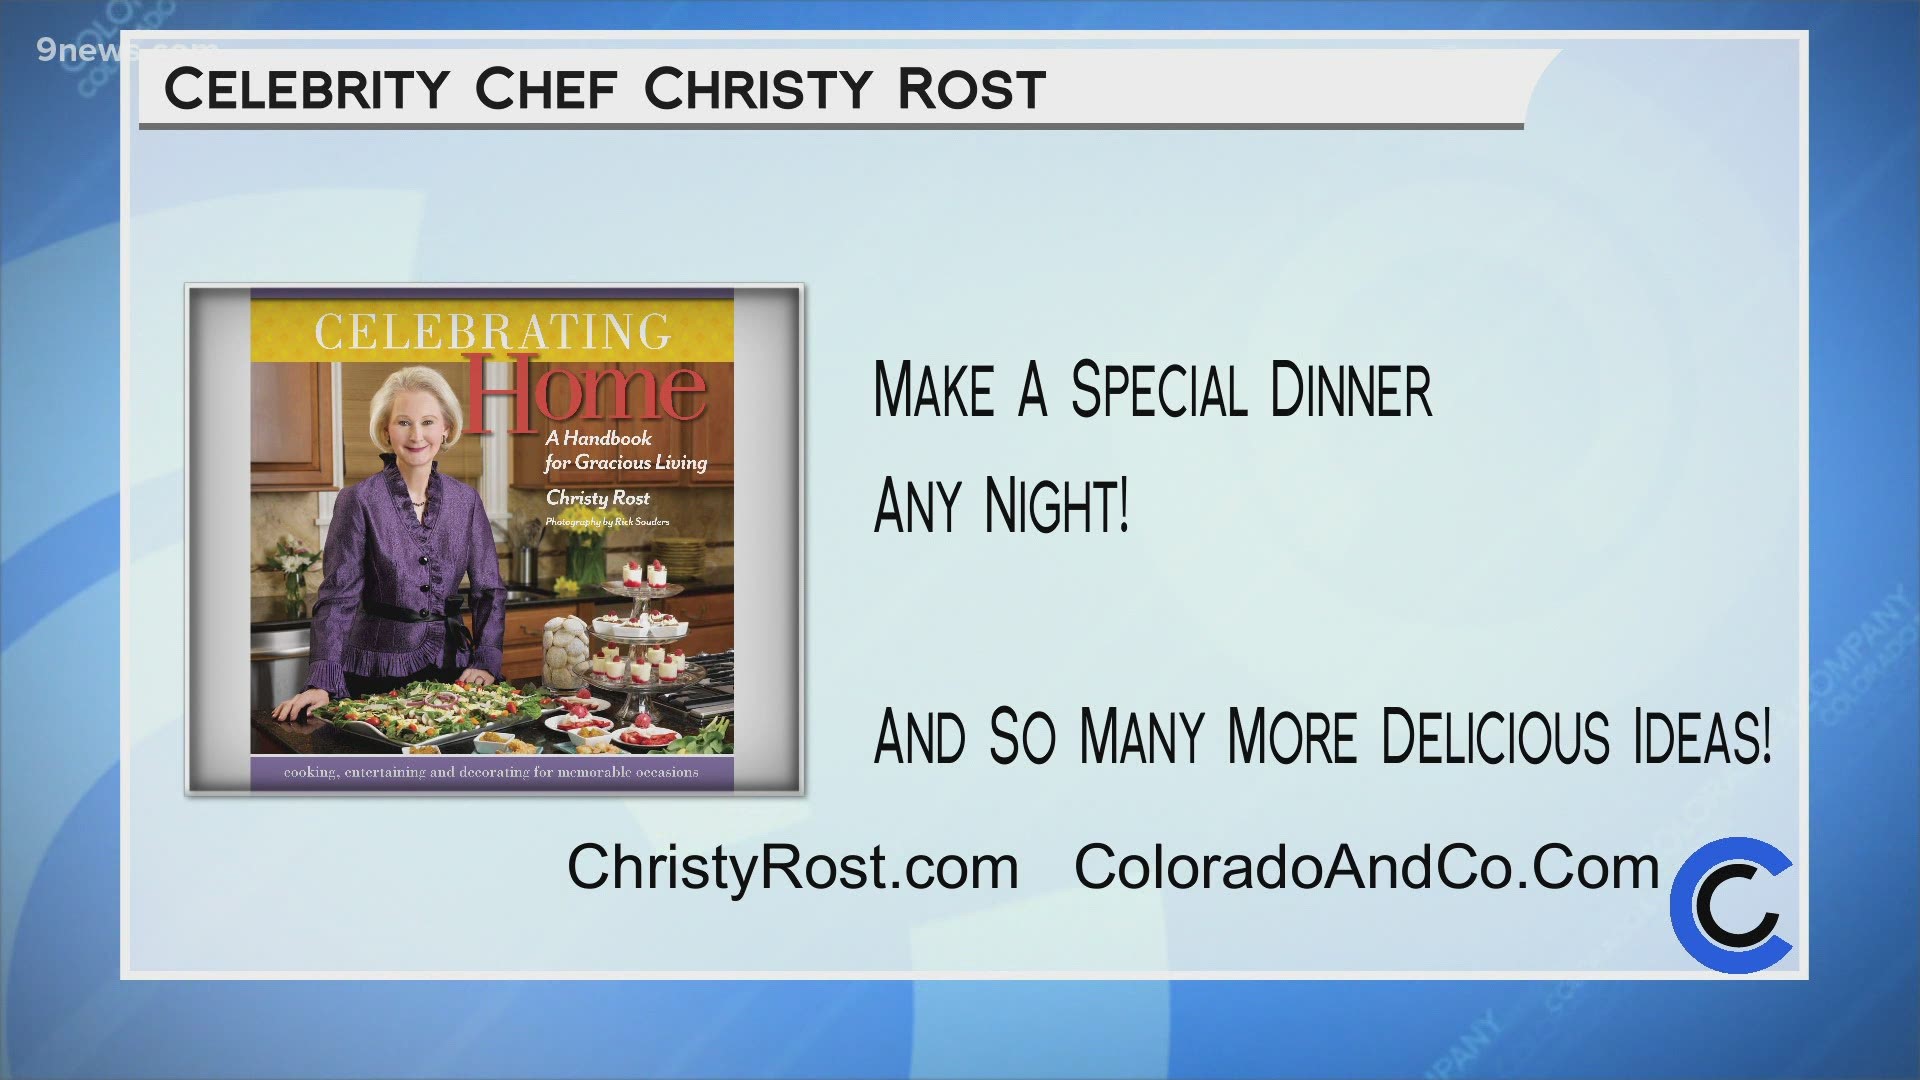 Try this recipe and many others at ChristyRost.com.